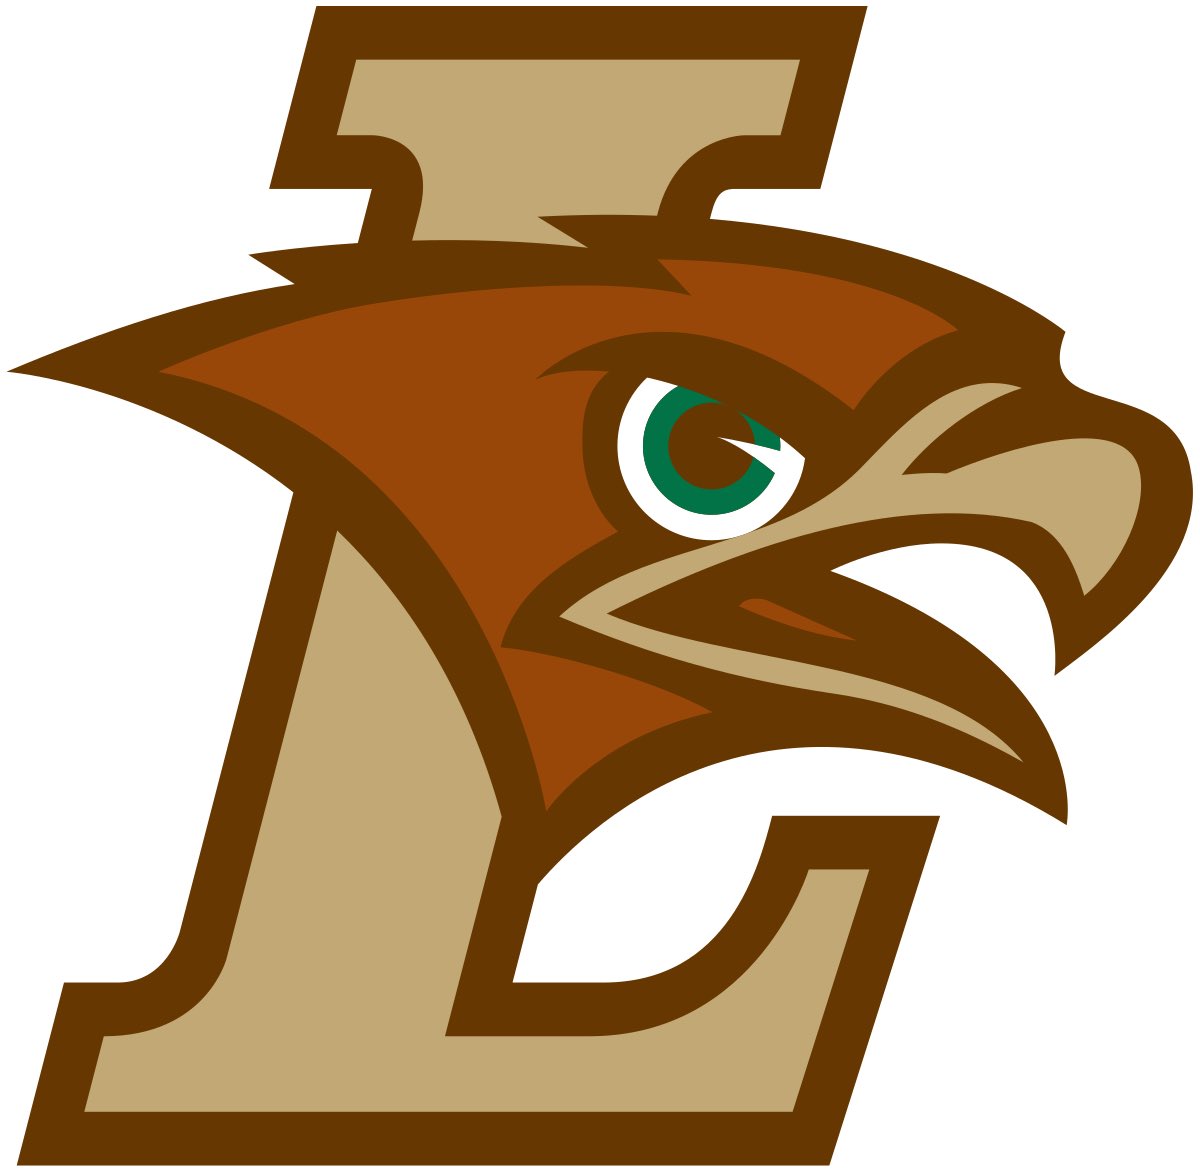 After a great call with @CoachTomGilmore , I’m blessed to have received a full scholarship offer to Lehigh University!! 🟤🟤#BeGREAT @Scott_Brisson @DABigGreenFB @bbarbato53